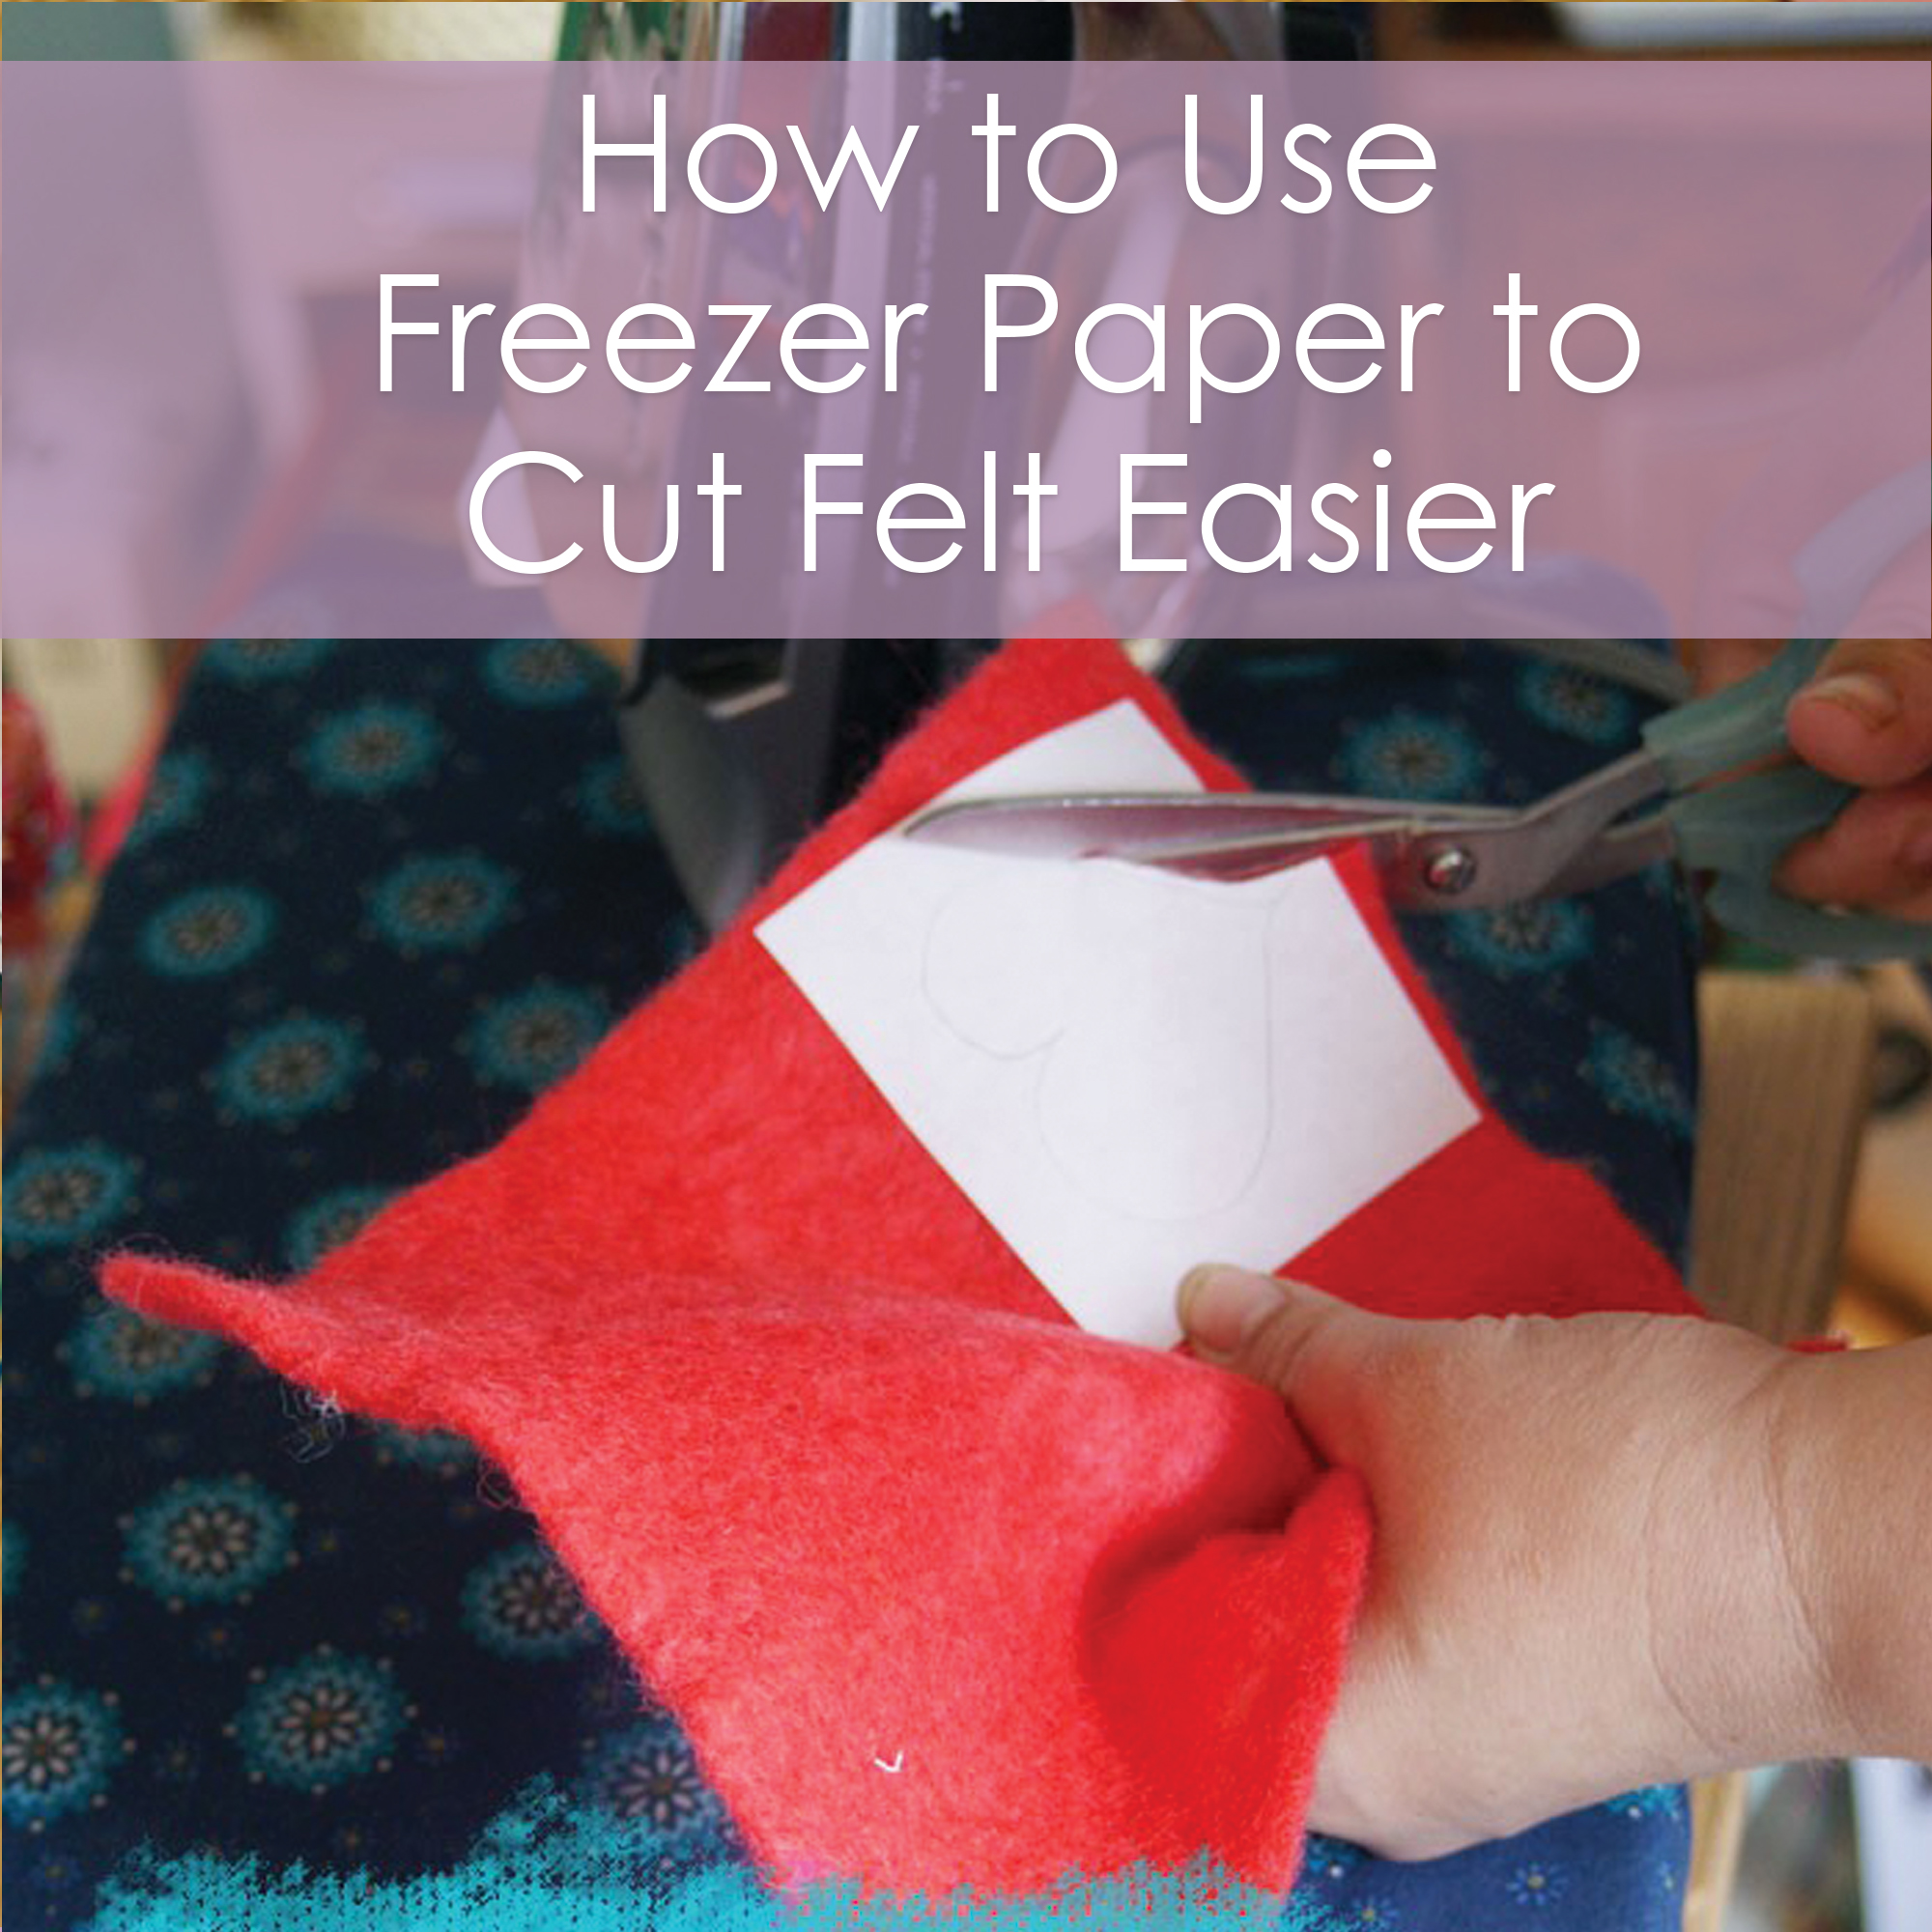 How to use freezer paper to cut felt easier - a tutorial from Muse of the Morning